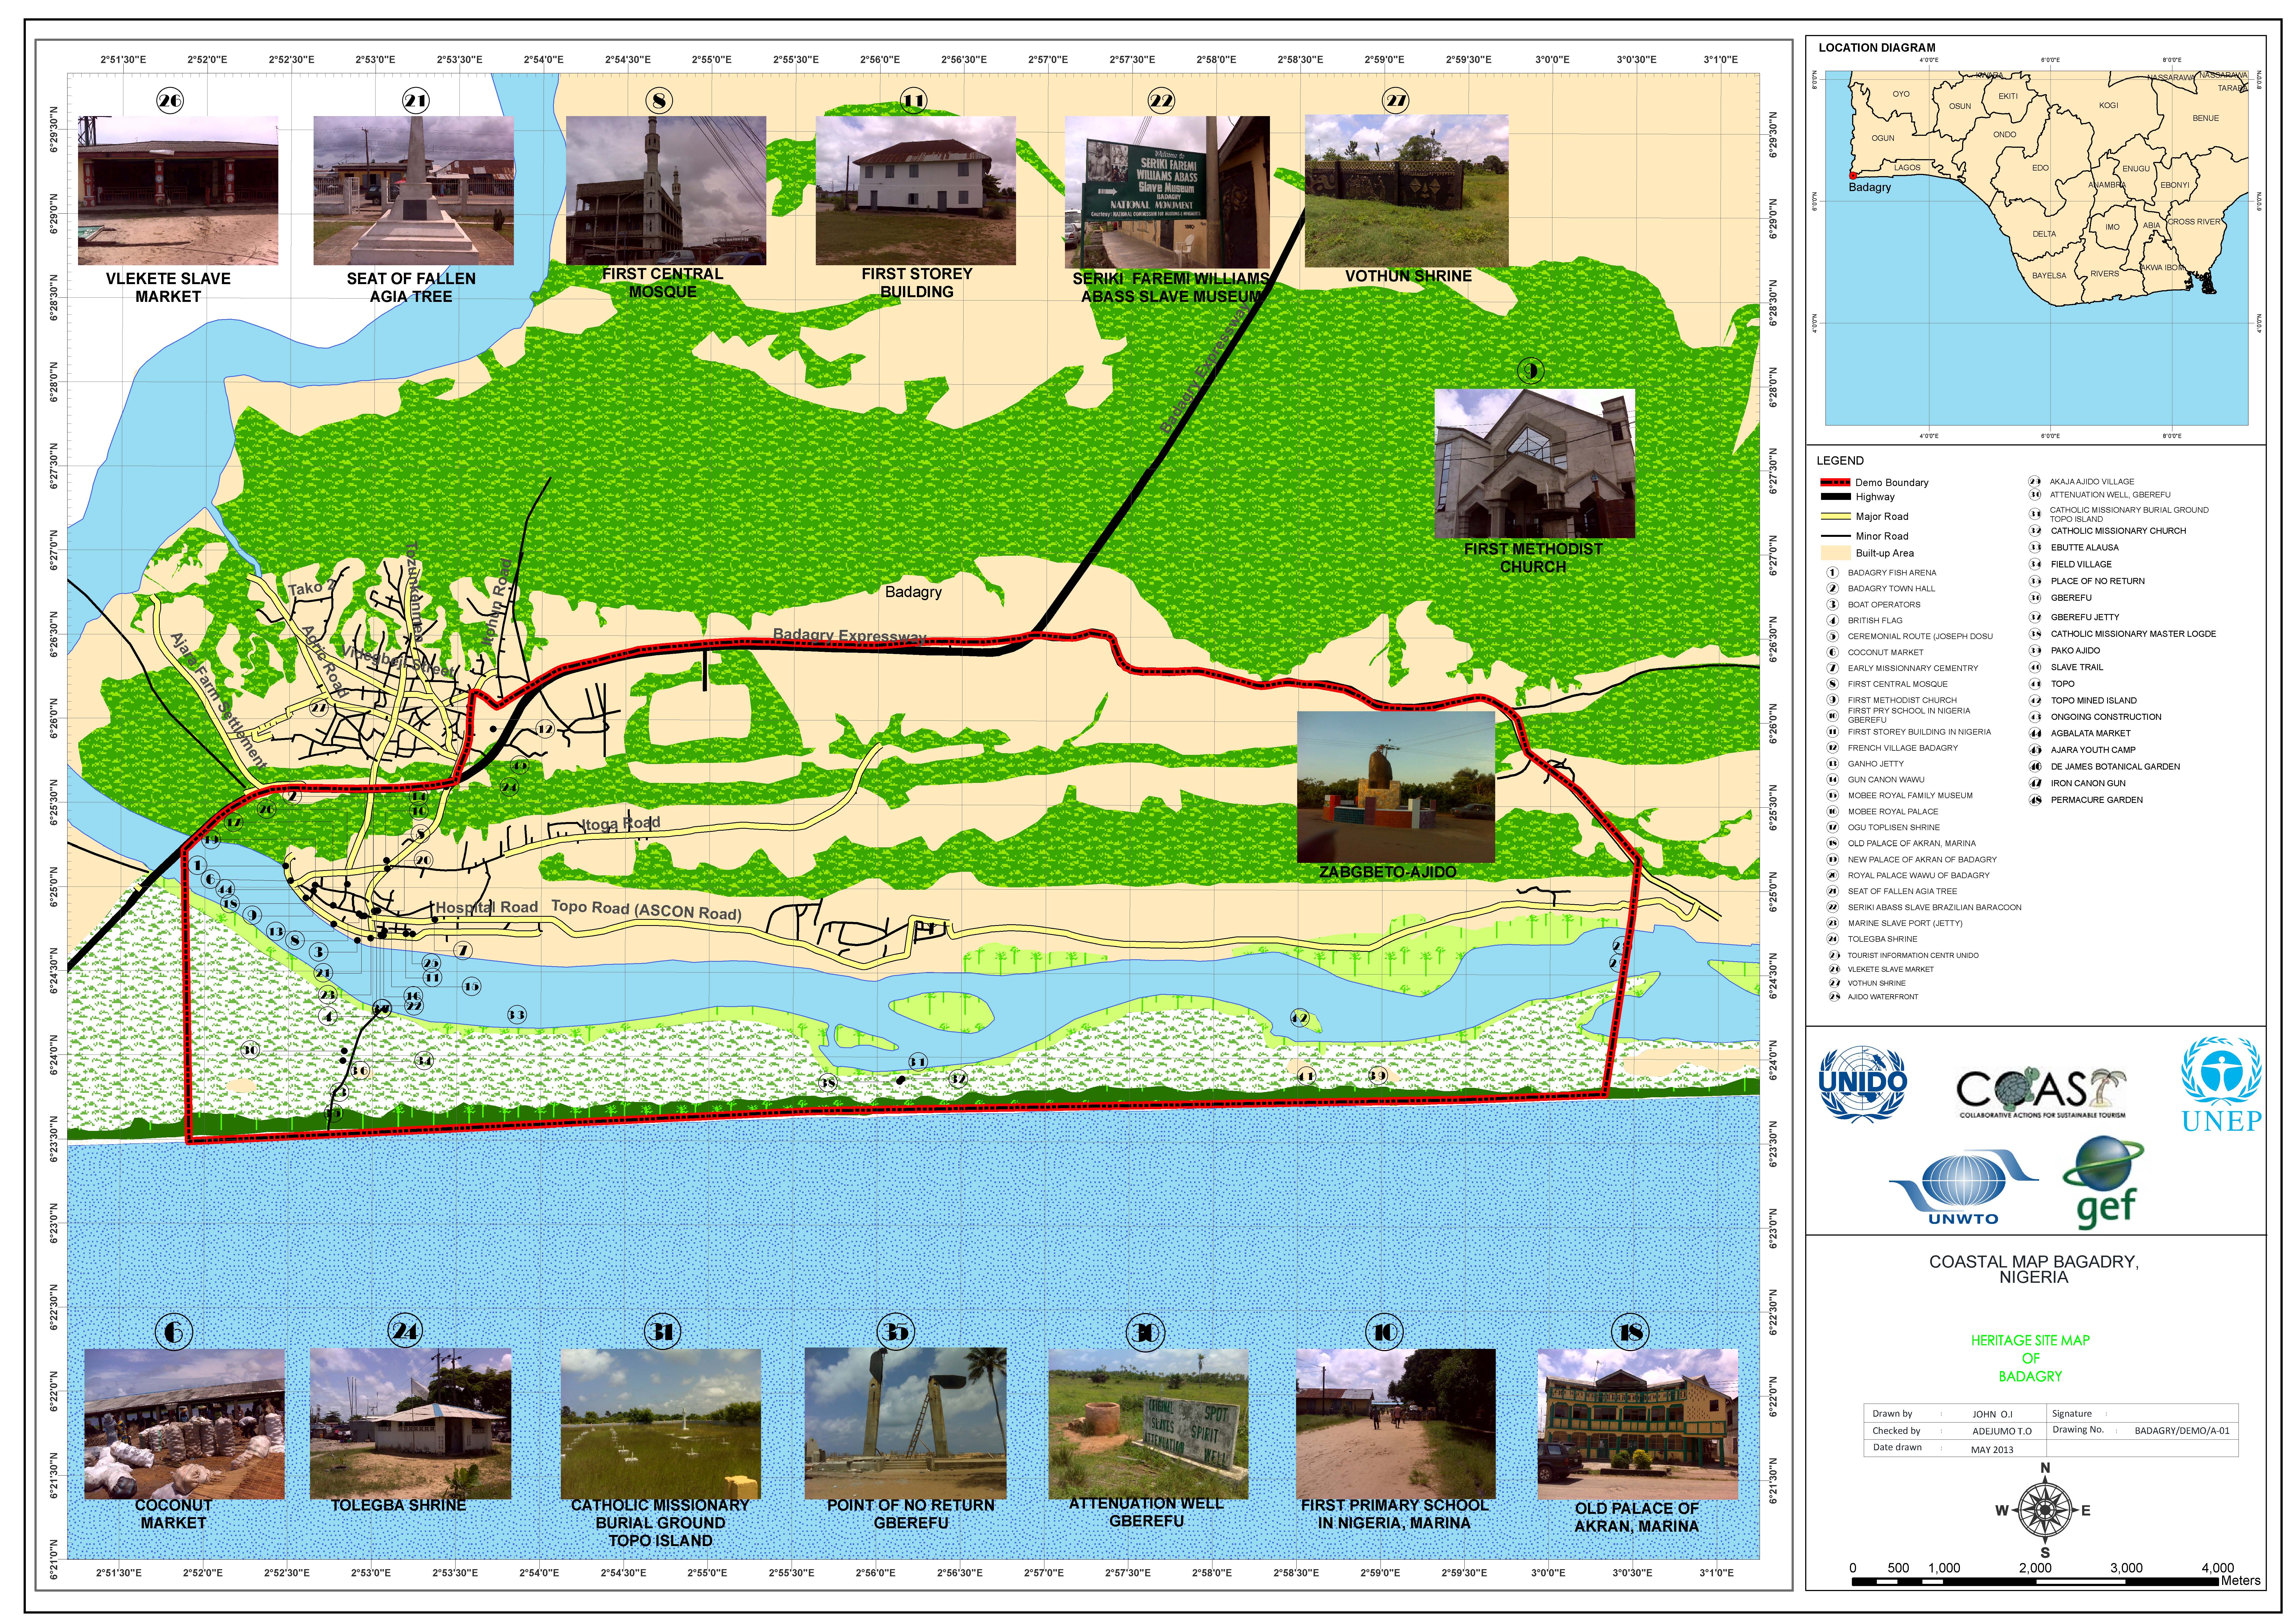 2013.11.04 Final Heritage Resources Map Badagry.jpg